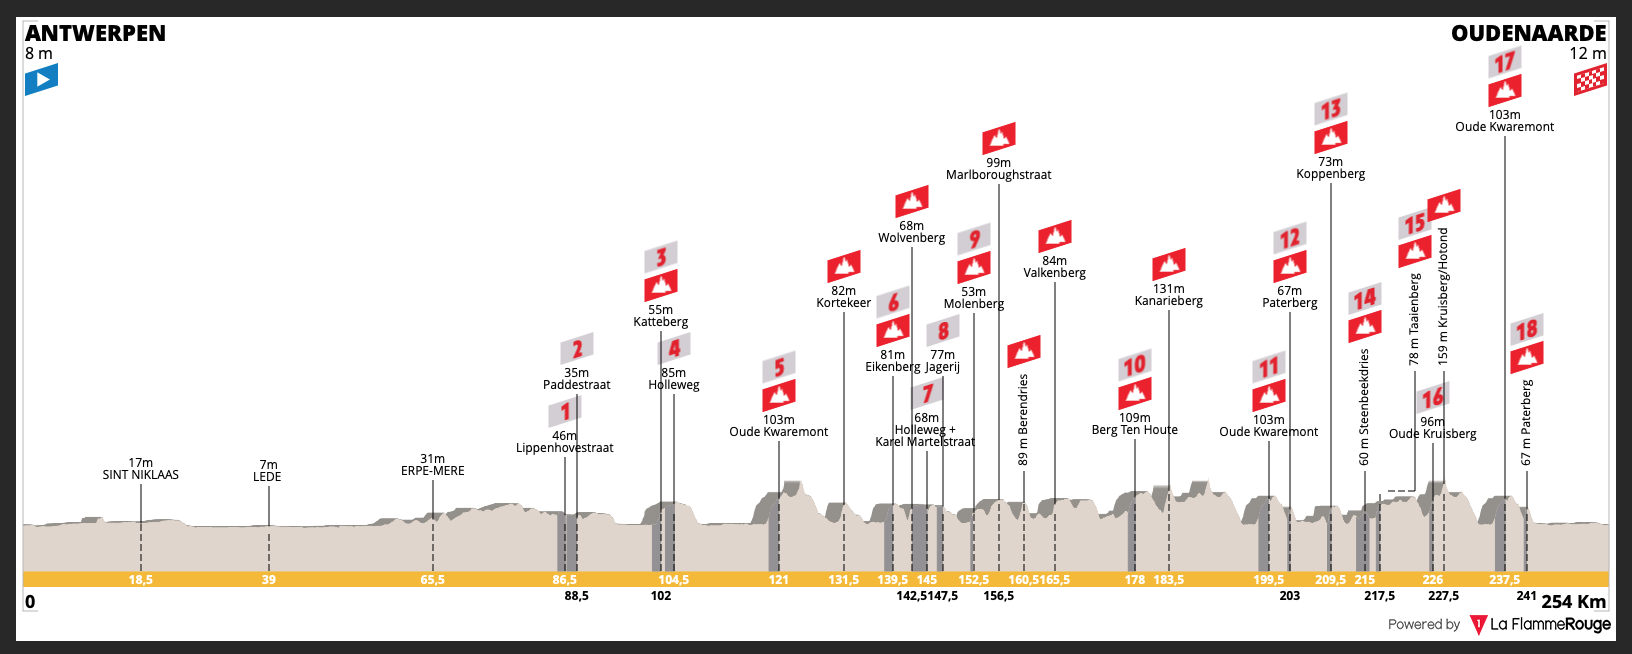 tour of flanders line up